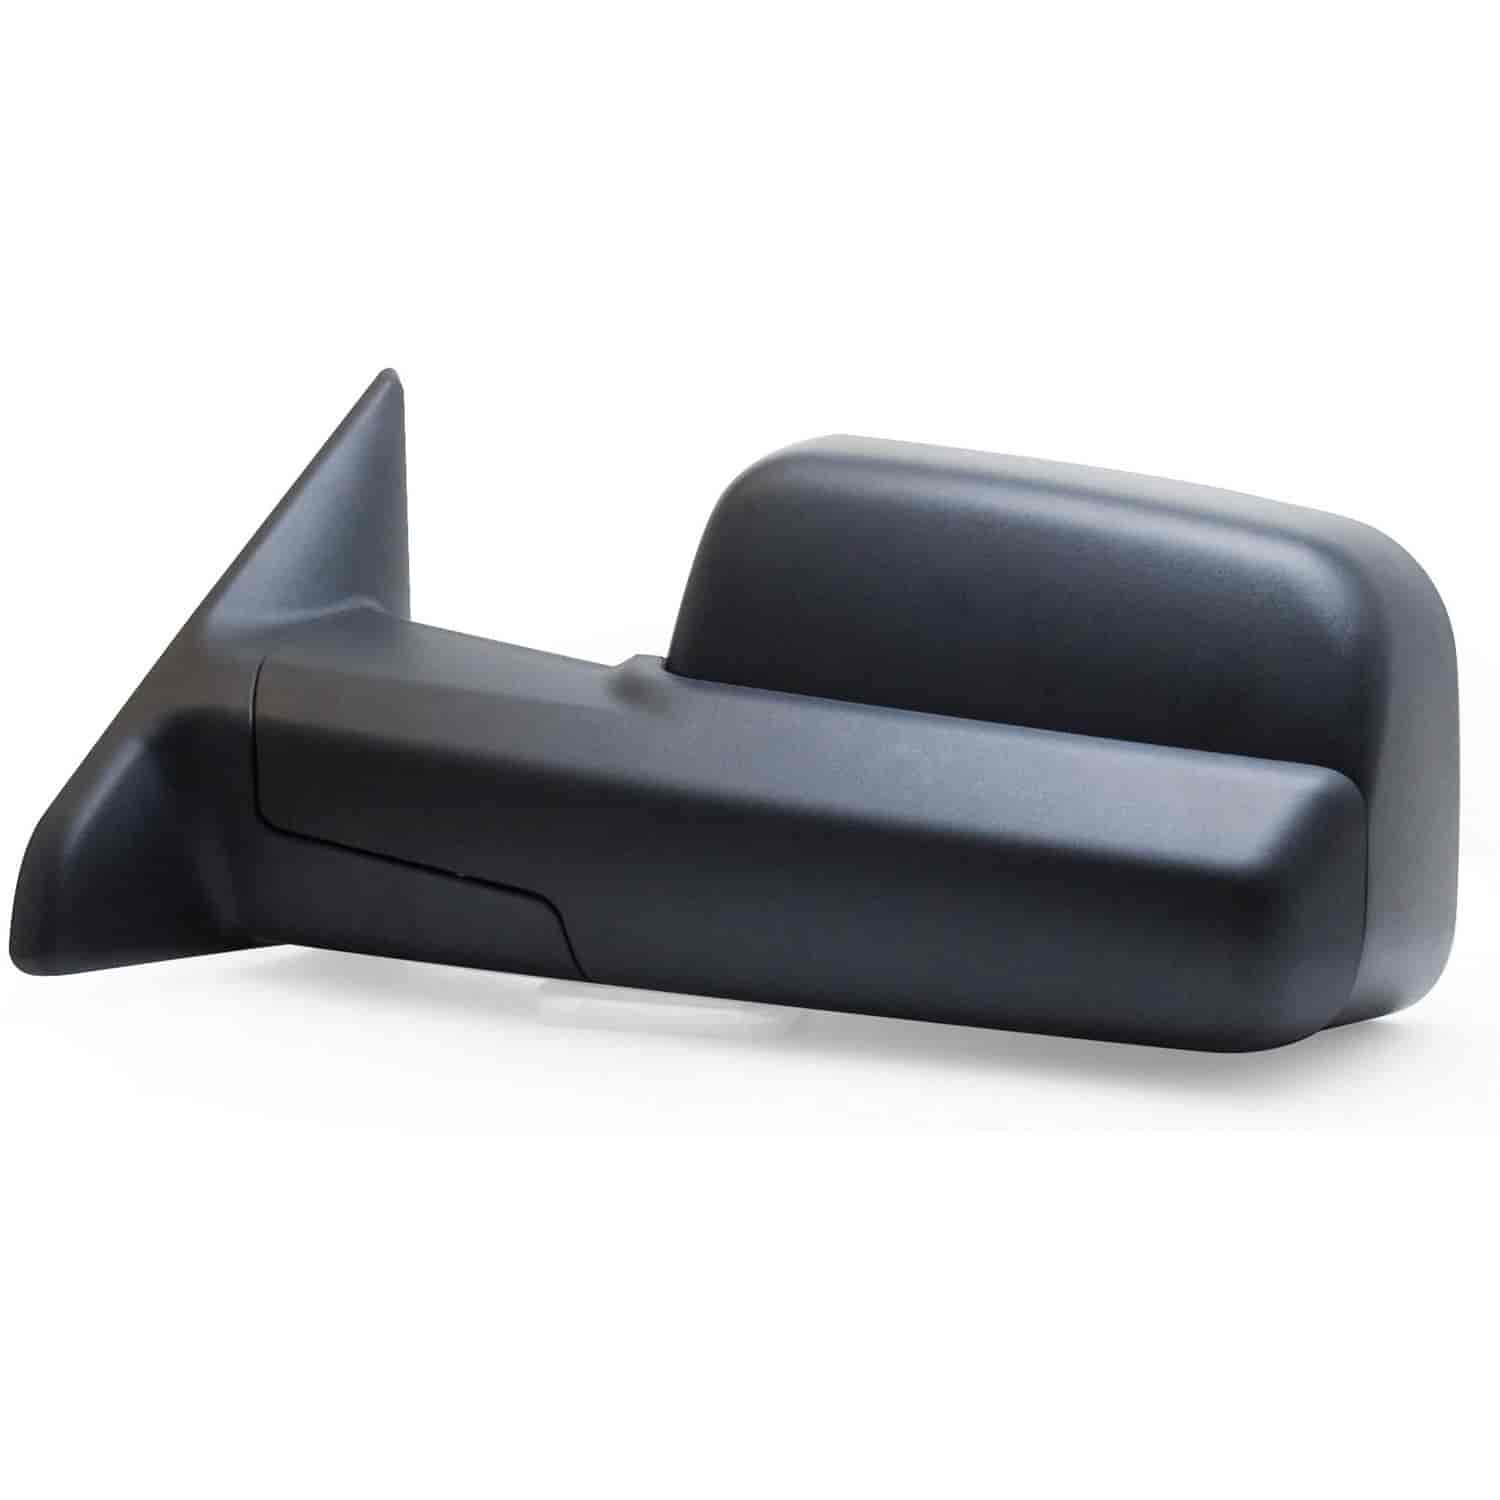 OEM Style Replacement mirror for 09-13 Dodge/ Ram Pick-Up 1500 10-13 2500/ 3500 11-13 Ram Pick-Up 15